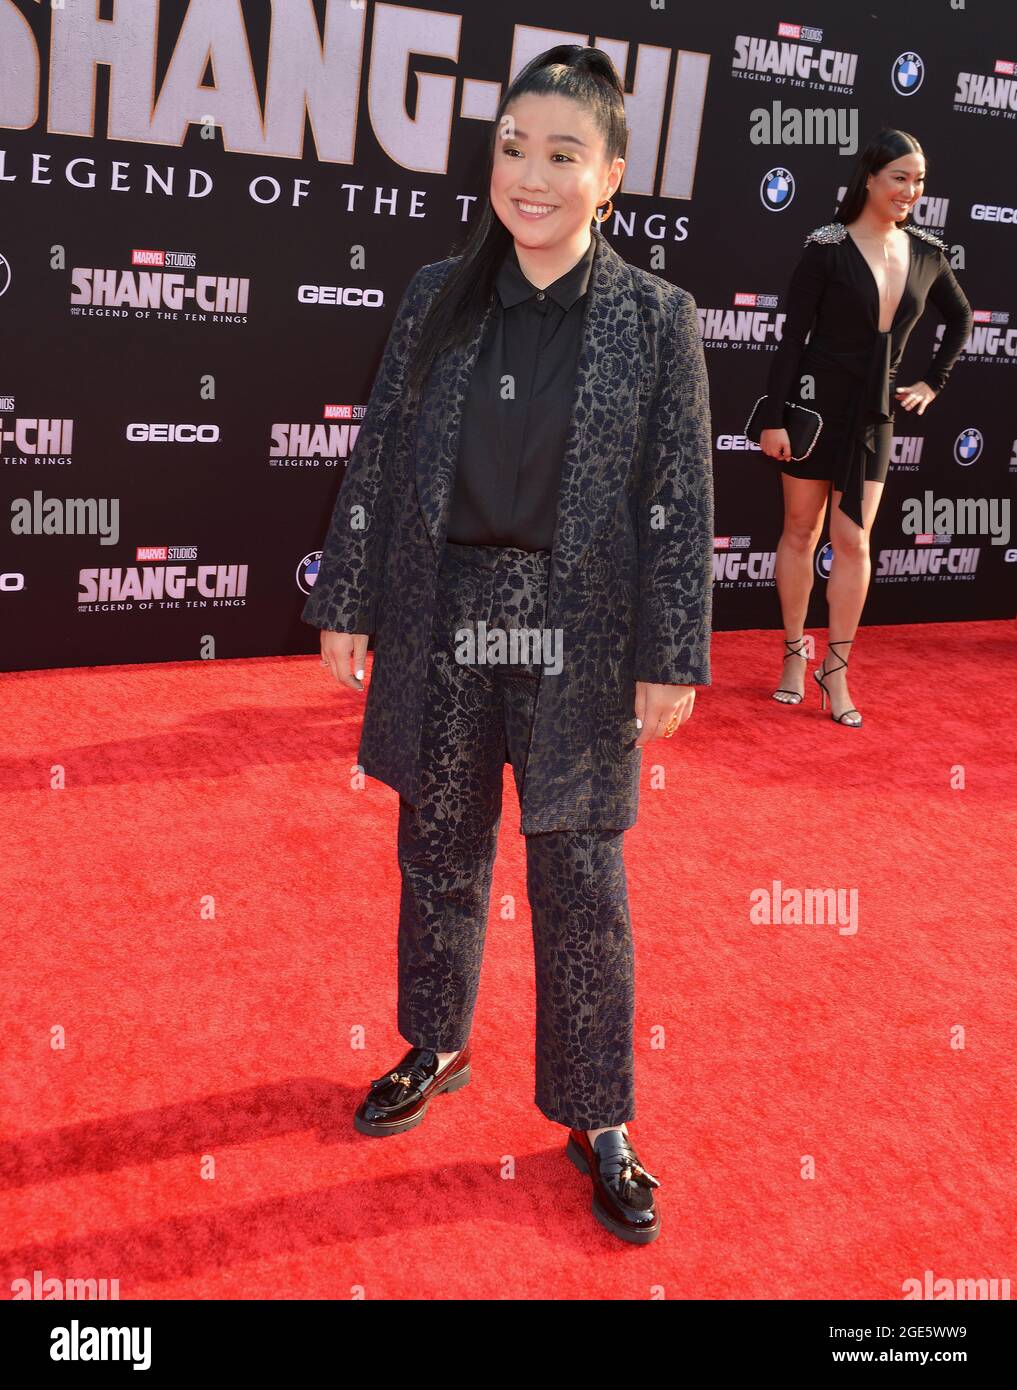 Los Angeles, USA. 17th Aug, 2021. Sherry Cola attends the Disney Marvel Premiere of Shang-Chi and the Legend of the Ten Rings at the El Capitan Theatre in Los Angeles. August 16, 2021. Credit: Tsuni/USA/Alamy Live News Stock Photo